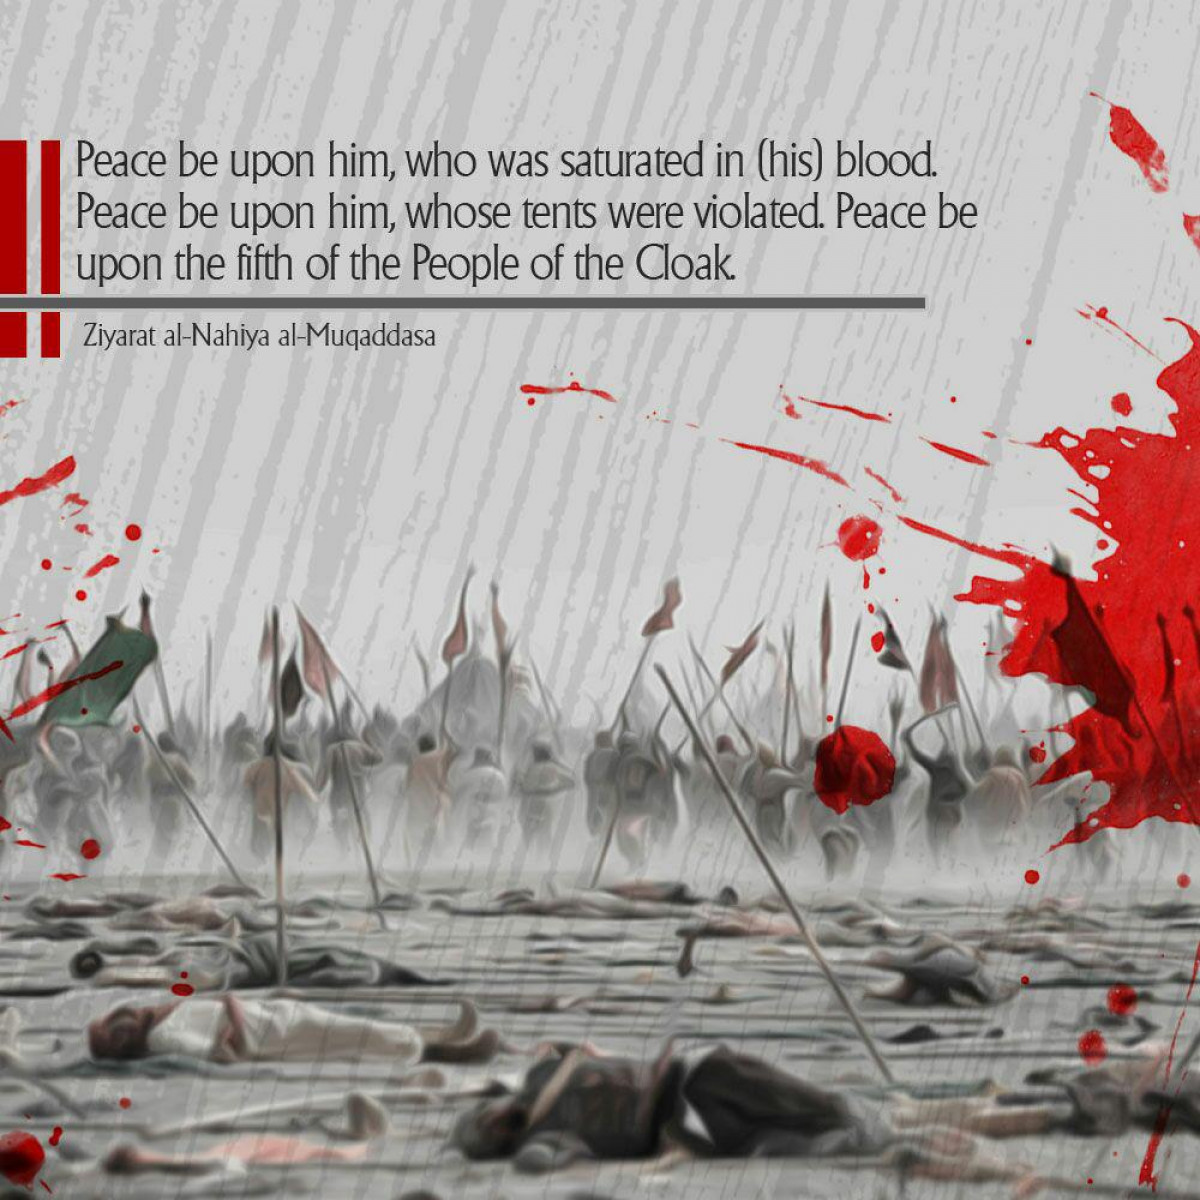 Peace be upon him, who was saturated in (his) blood